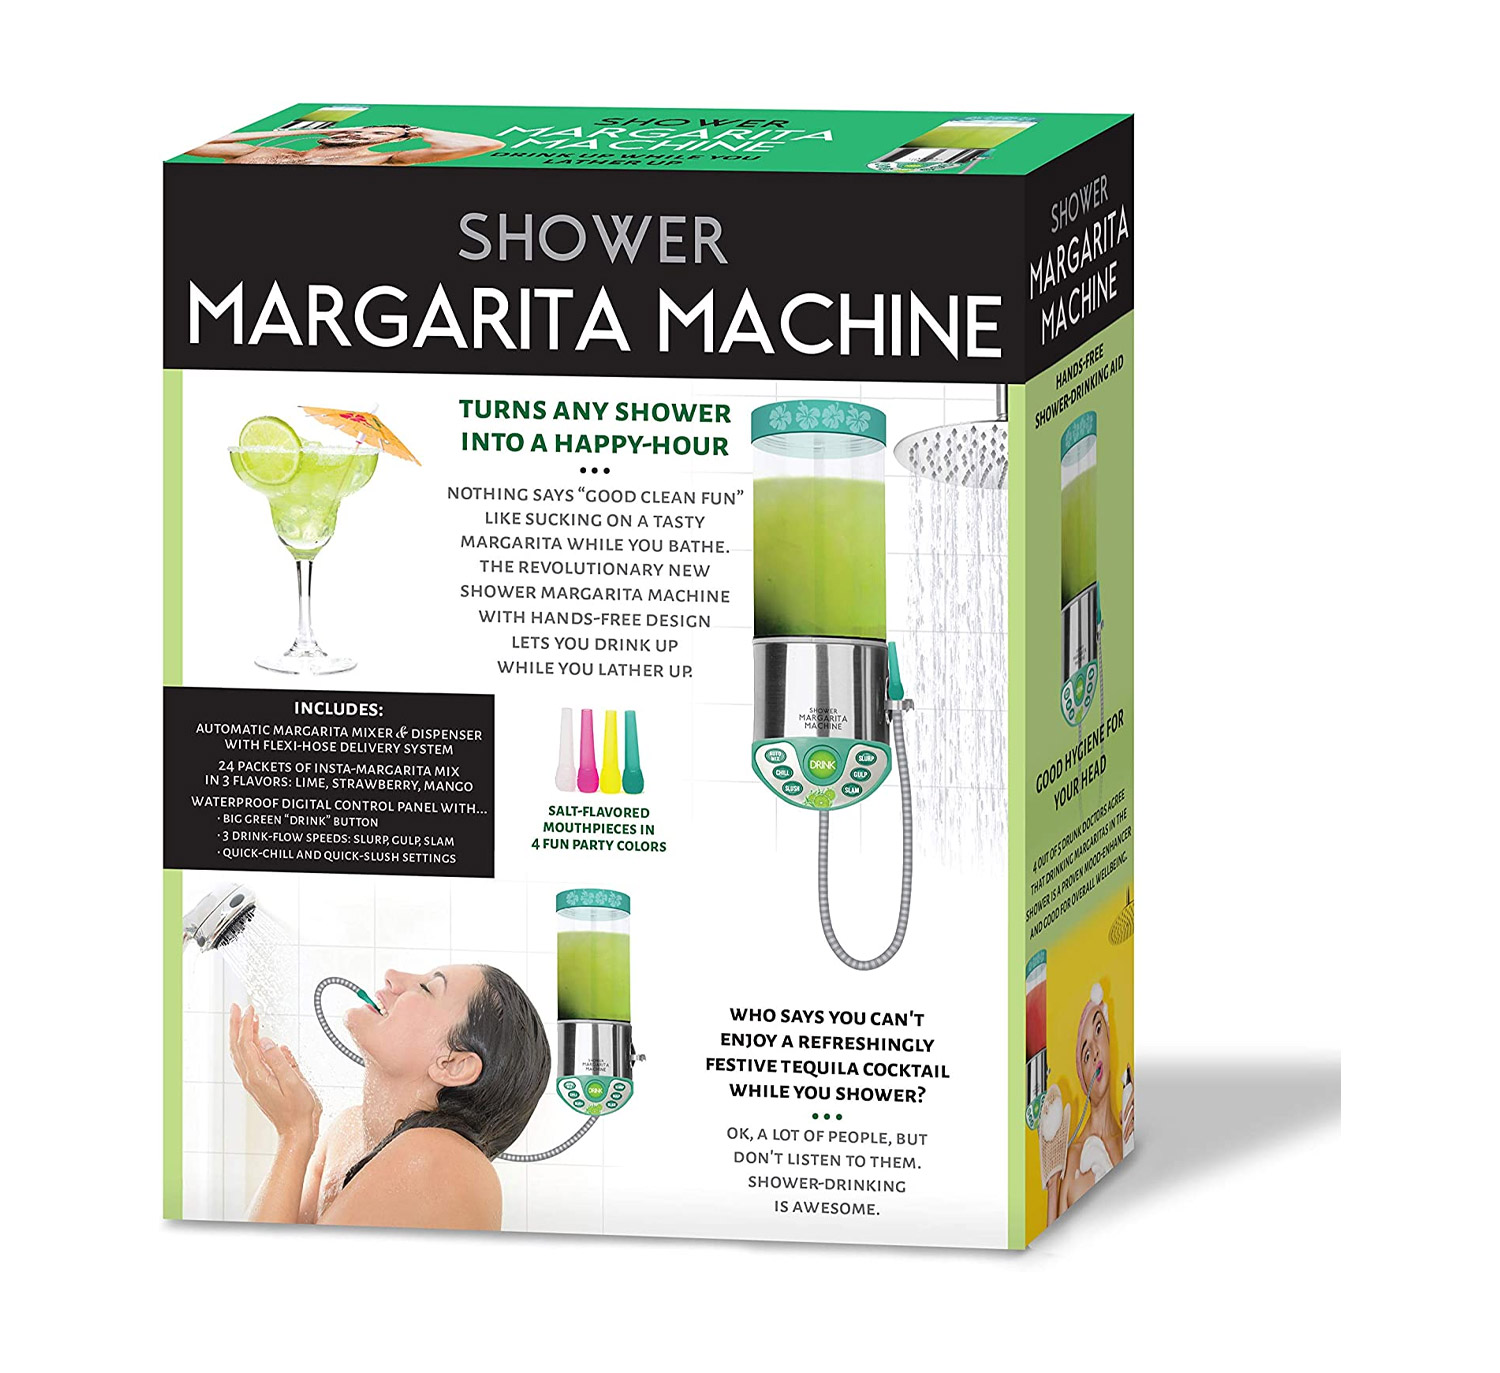 Shower Margarita Machine Gets You Boozed Up In The Shower Hands-Free